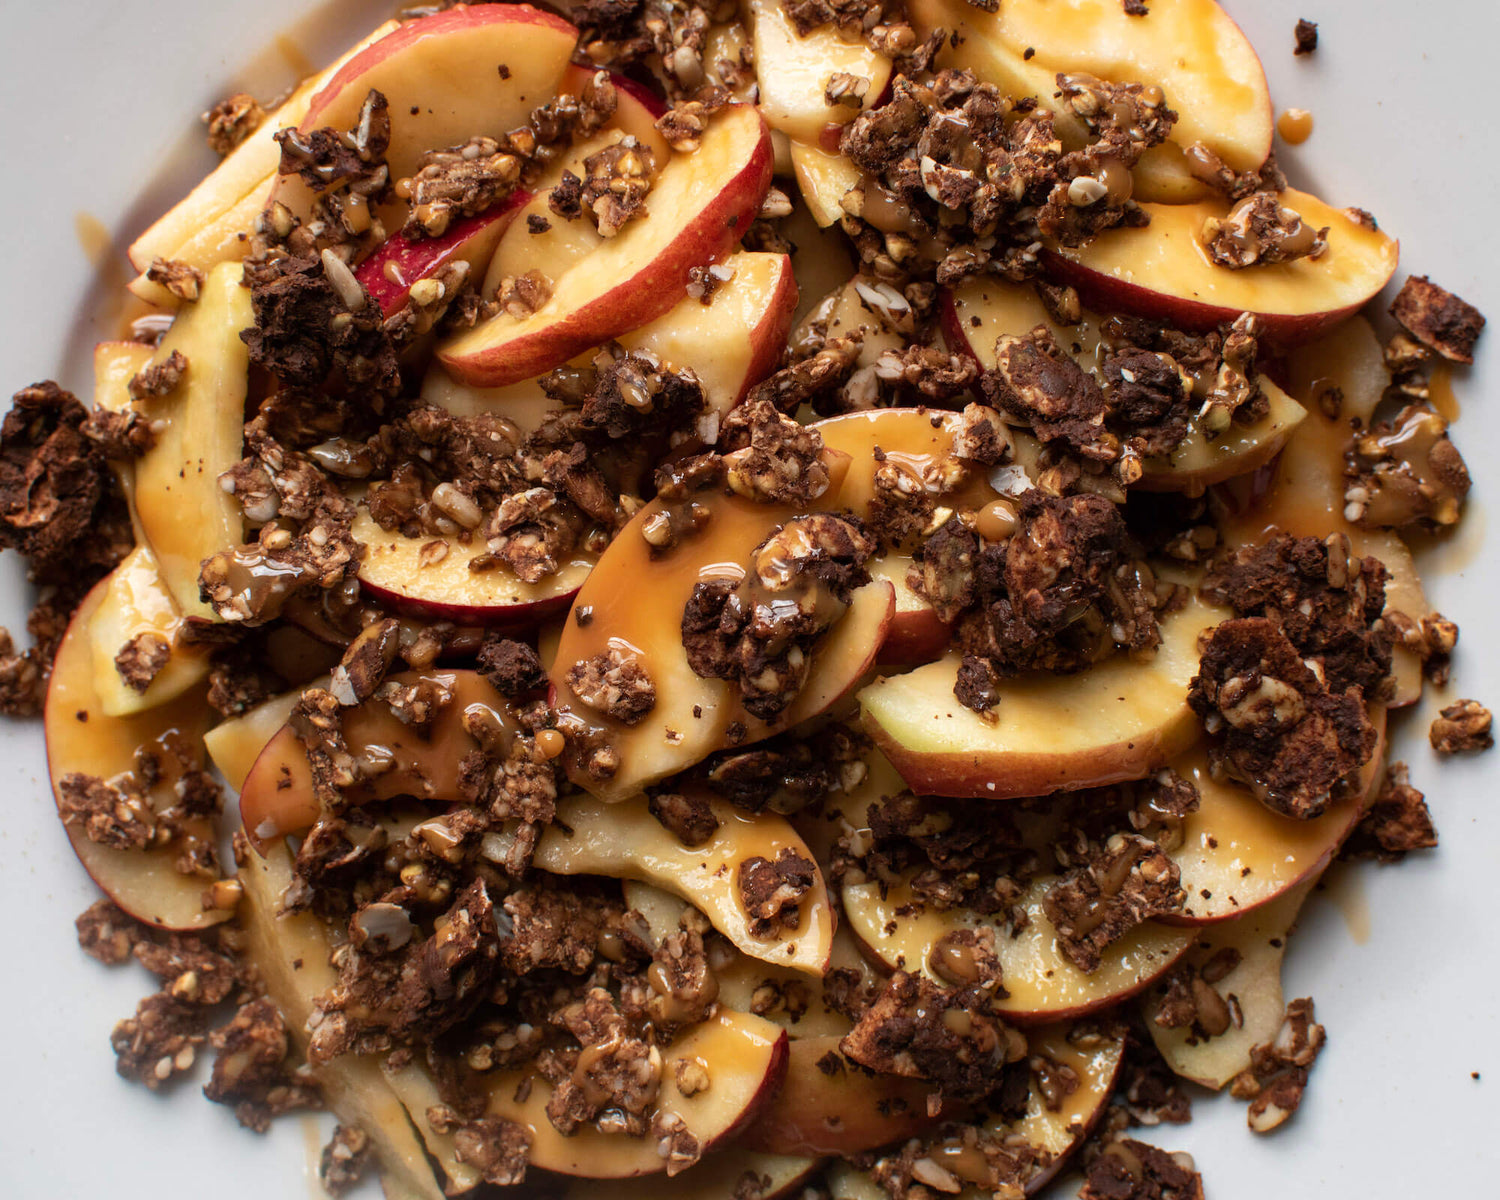 Crunchy Chocolate Caramel Apple Nachos with Go Raw Granola and Coconut Clusters